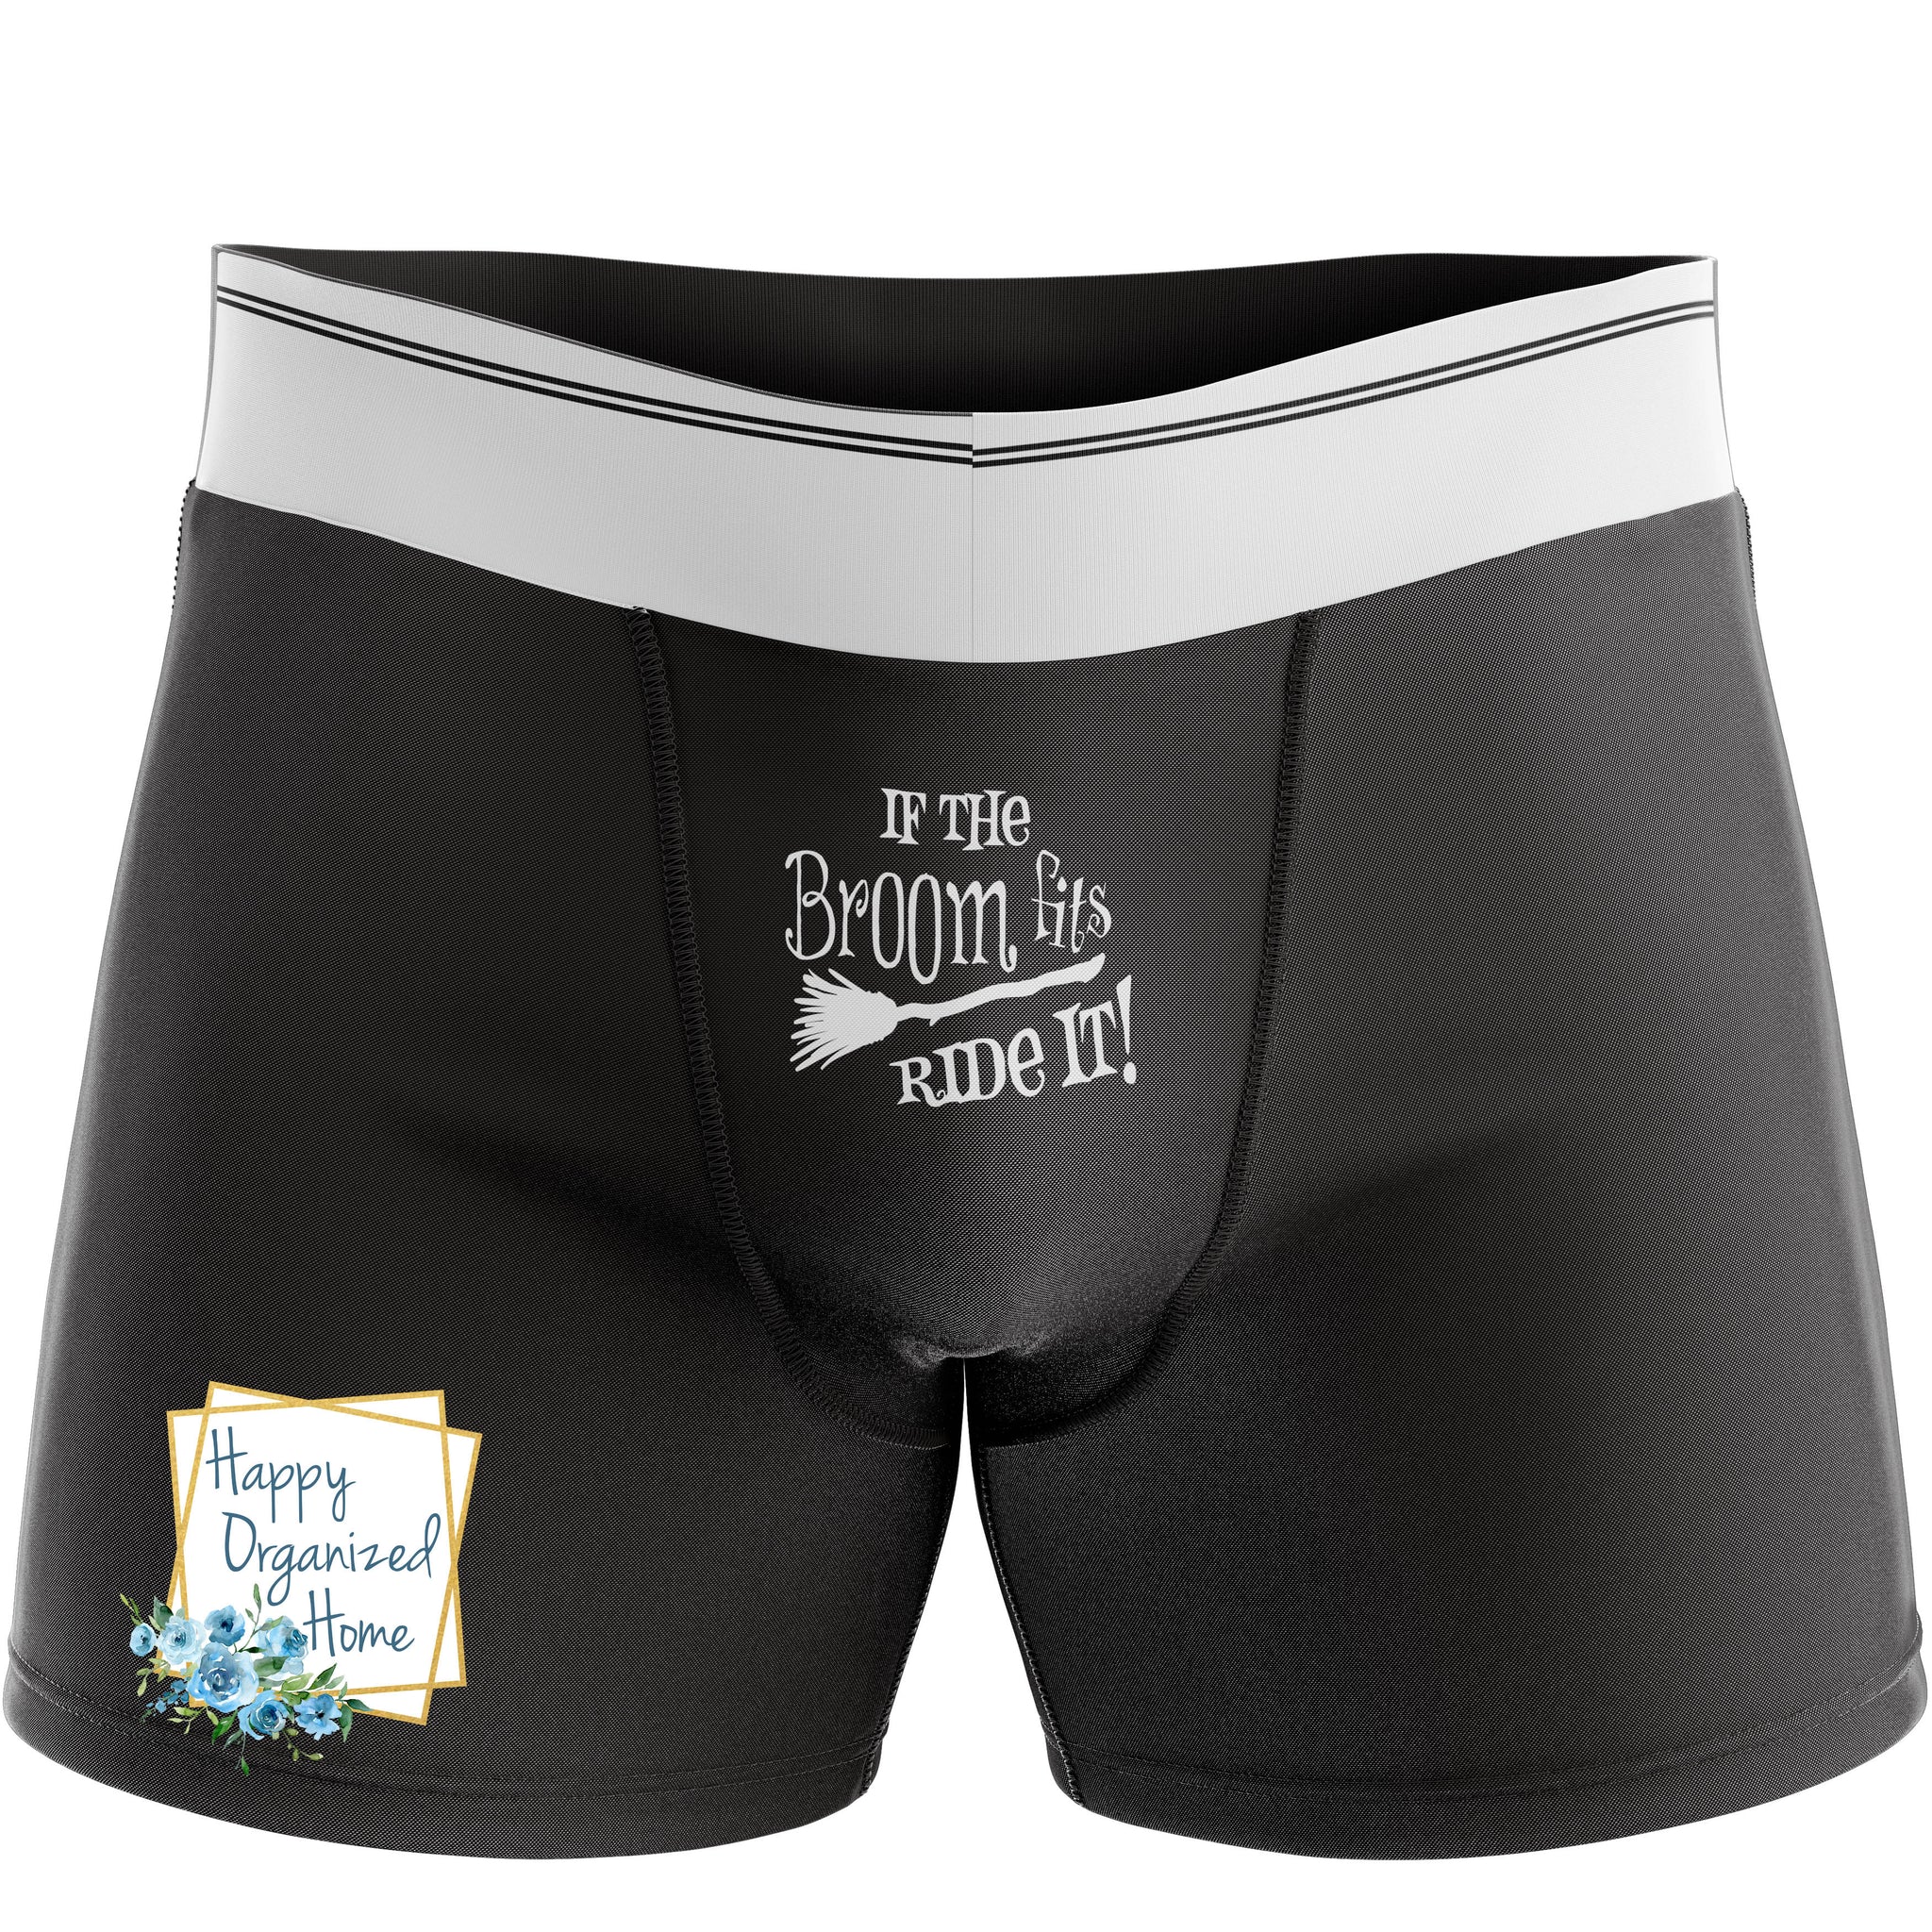 If the Broom Fits, Ride it - Men's Naughty Boxer Briefs – Happy Organized  Home